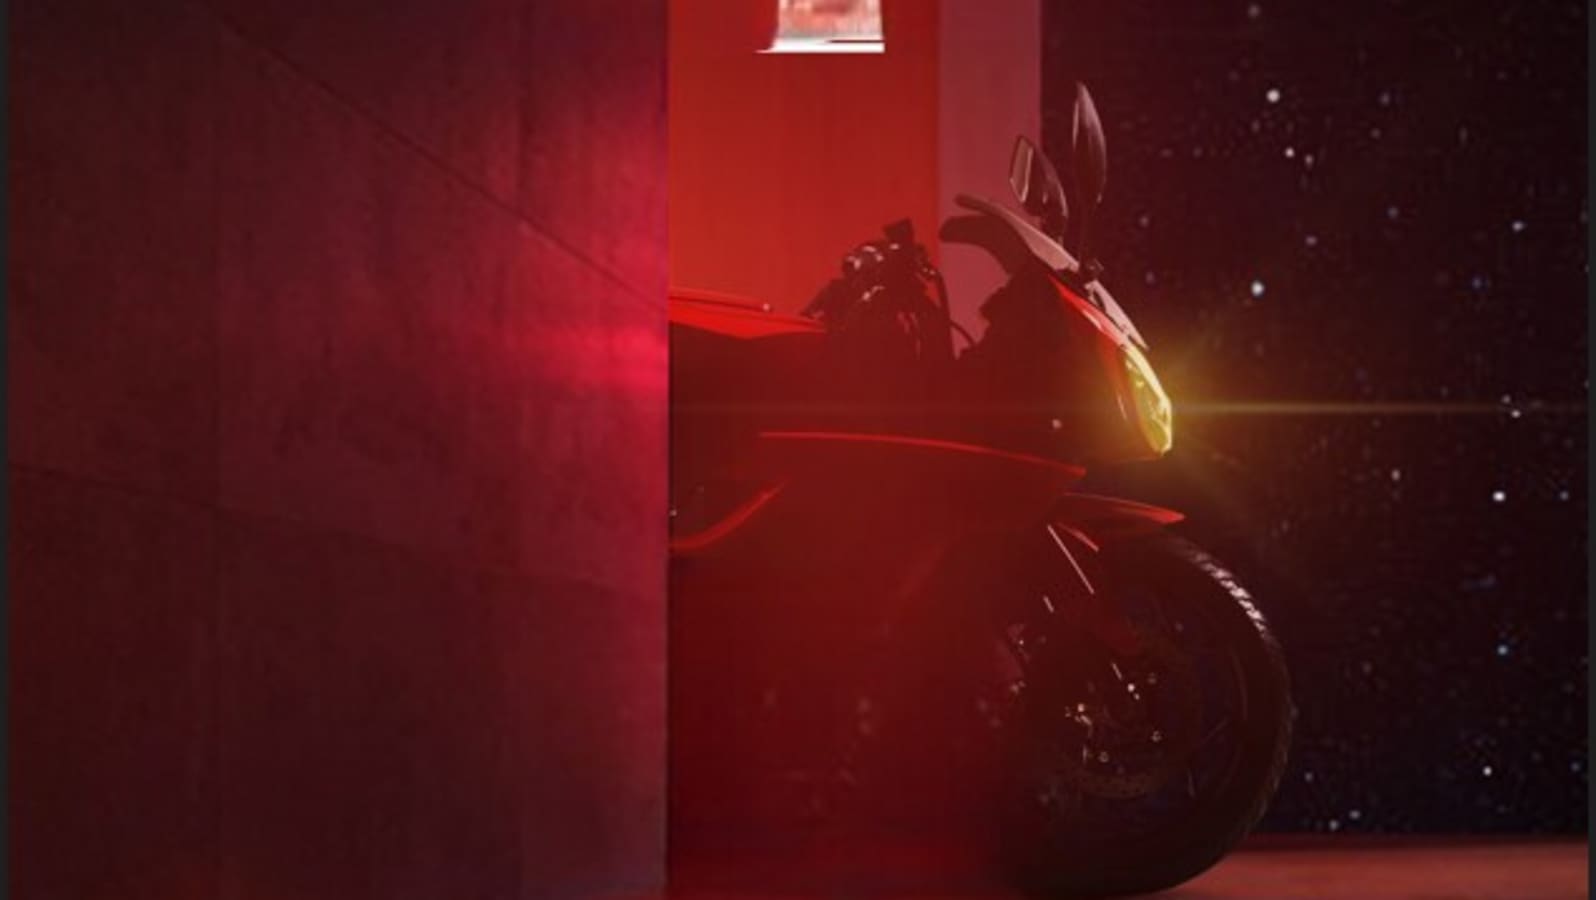 Okaya EV’s Ferrato opens pre-bookings for their upcoming electric motorcycle